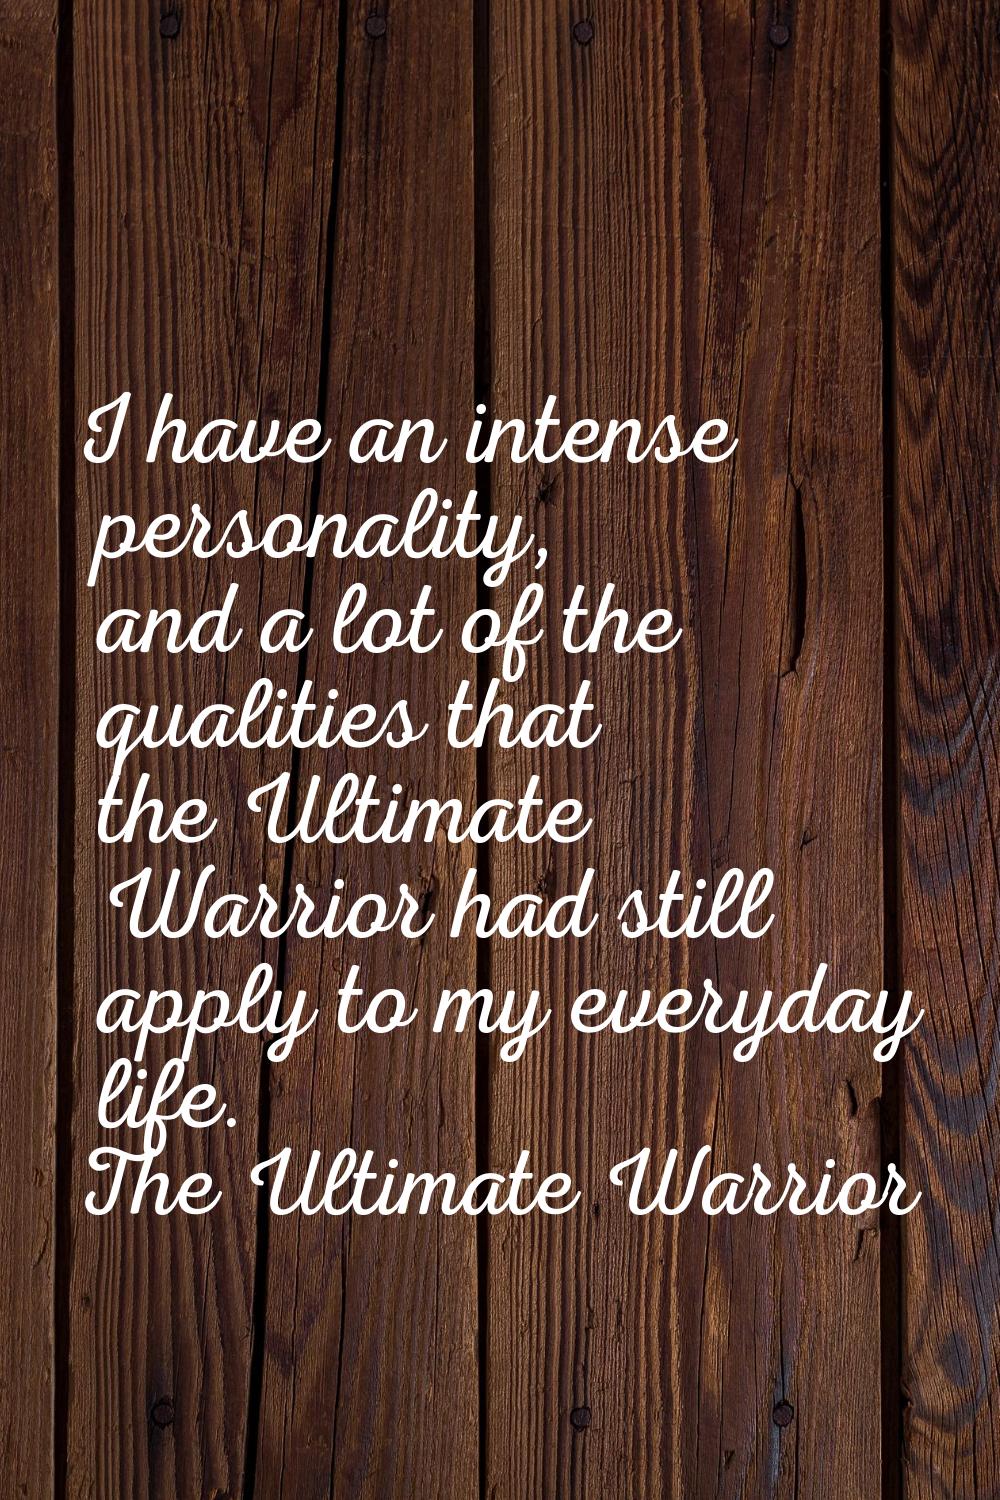 I have an intense personality, and a lot of the qualities that the Ultimate Warrior had still apply